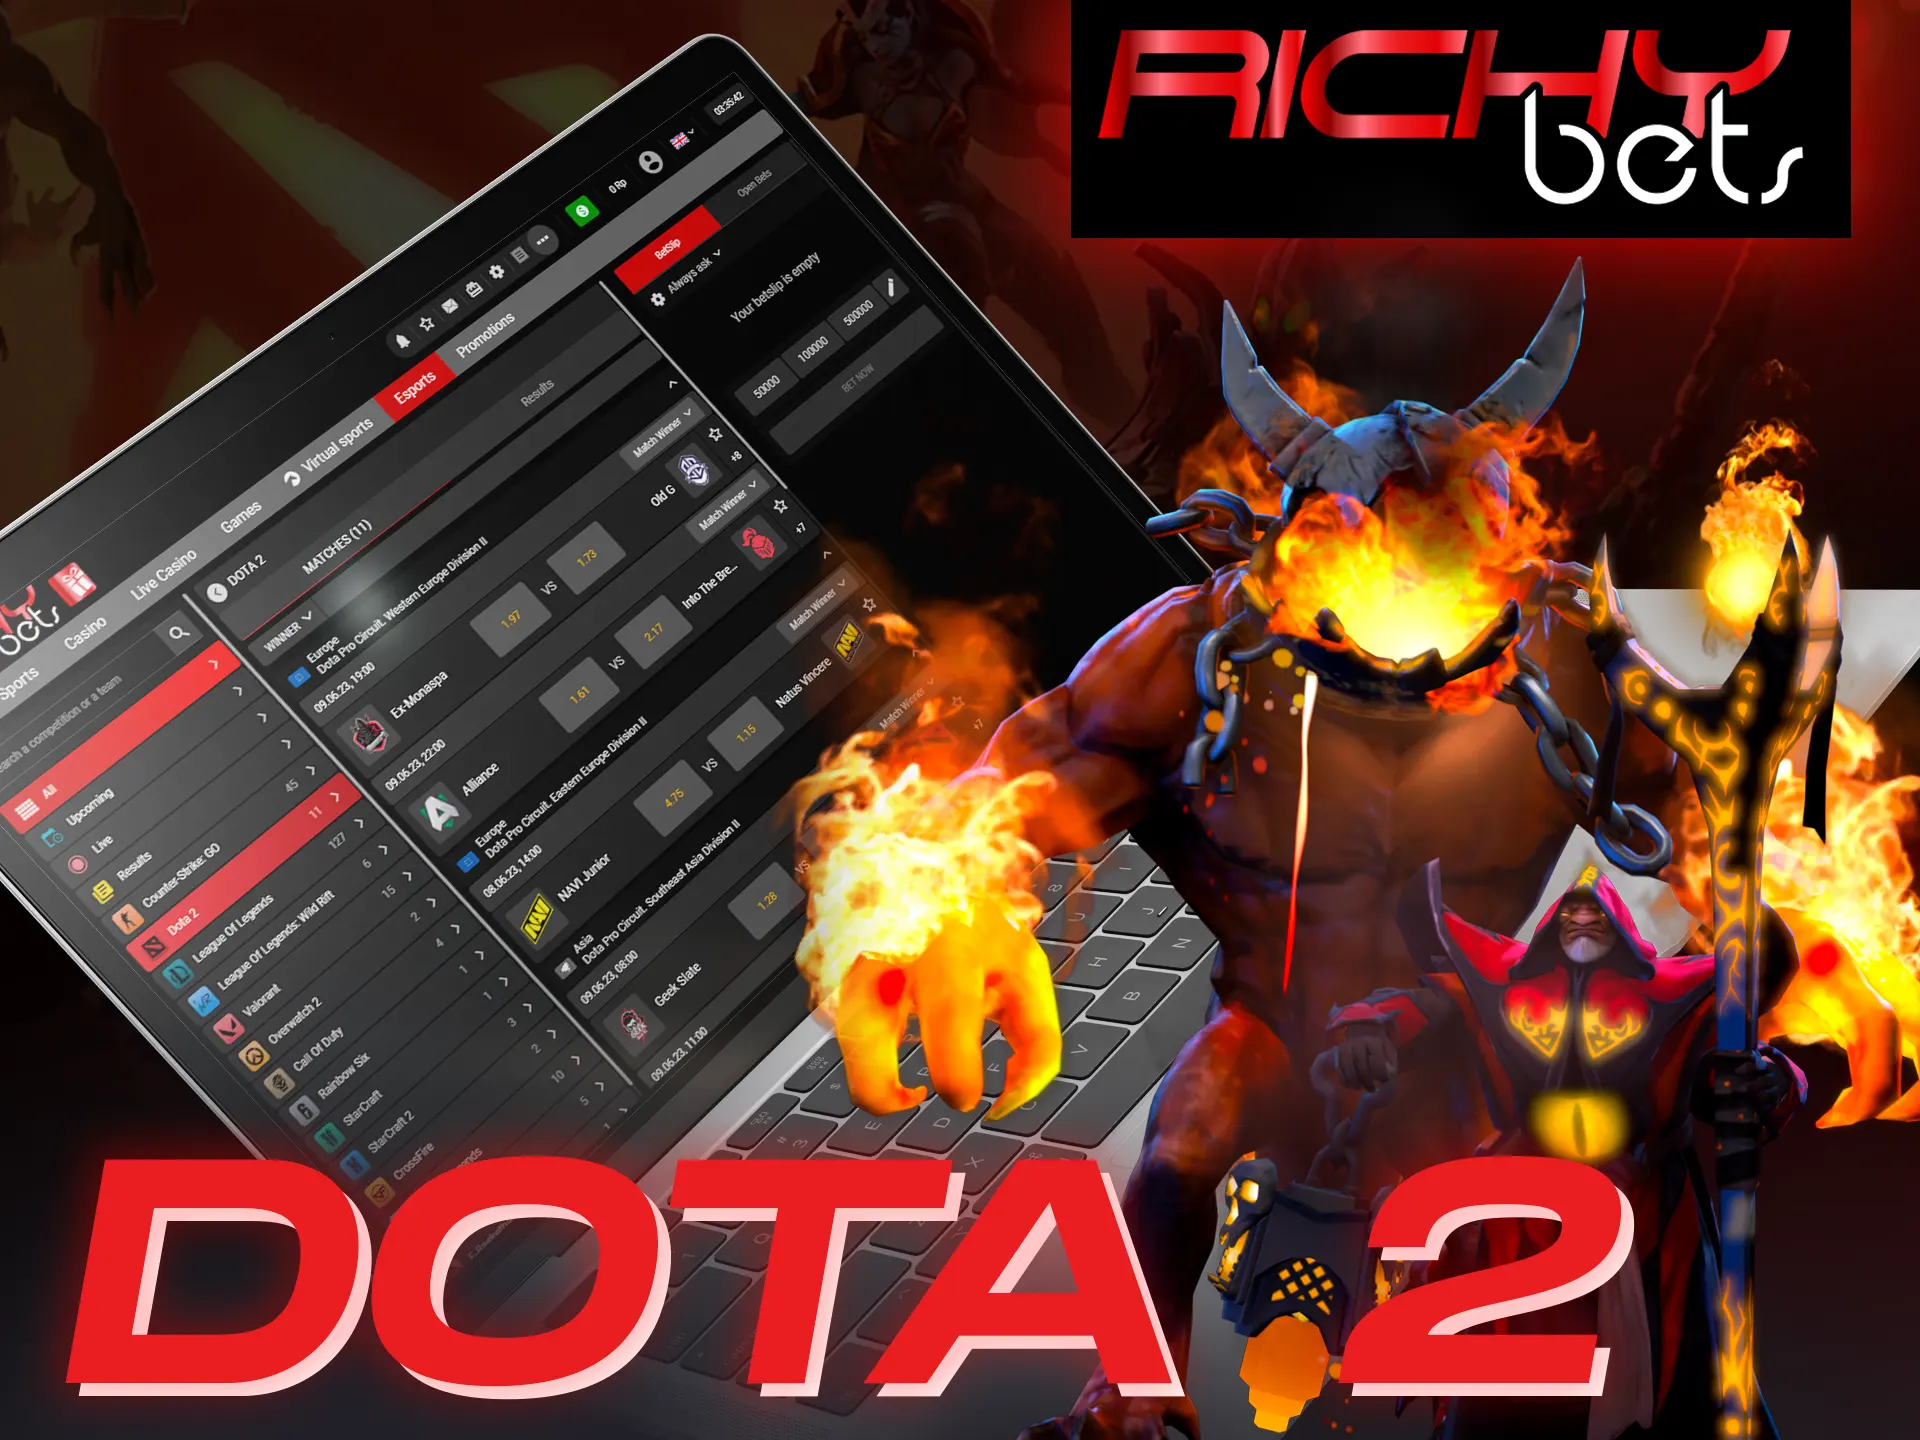 Bet on your favorite Dota 2 team and win money at the Richybets.